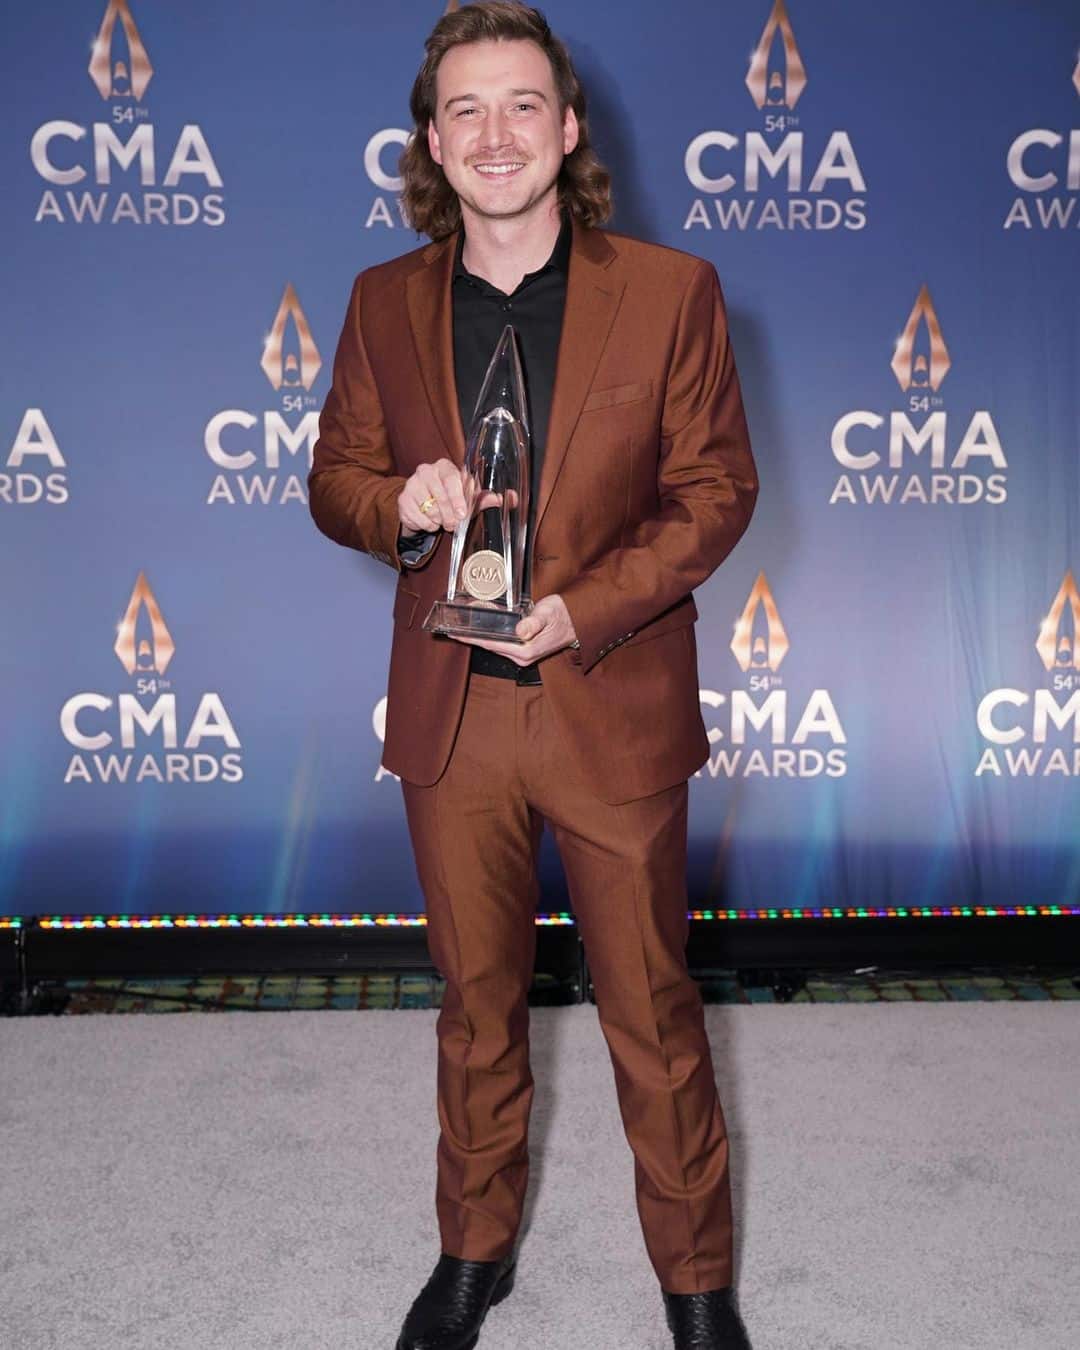 Morgan Wallen - Biography, Profile, Facts, and Career